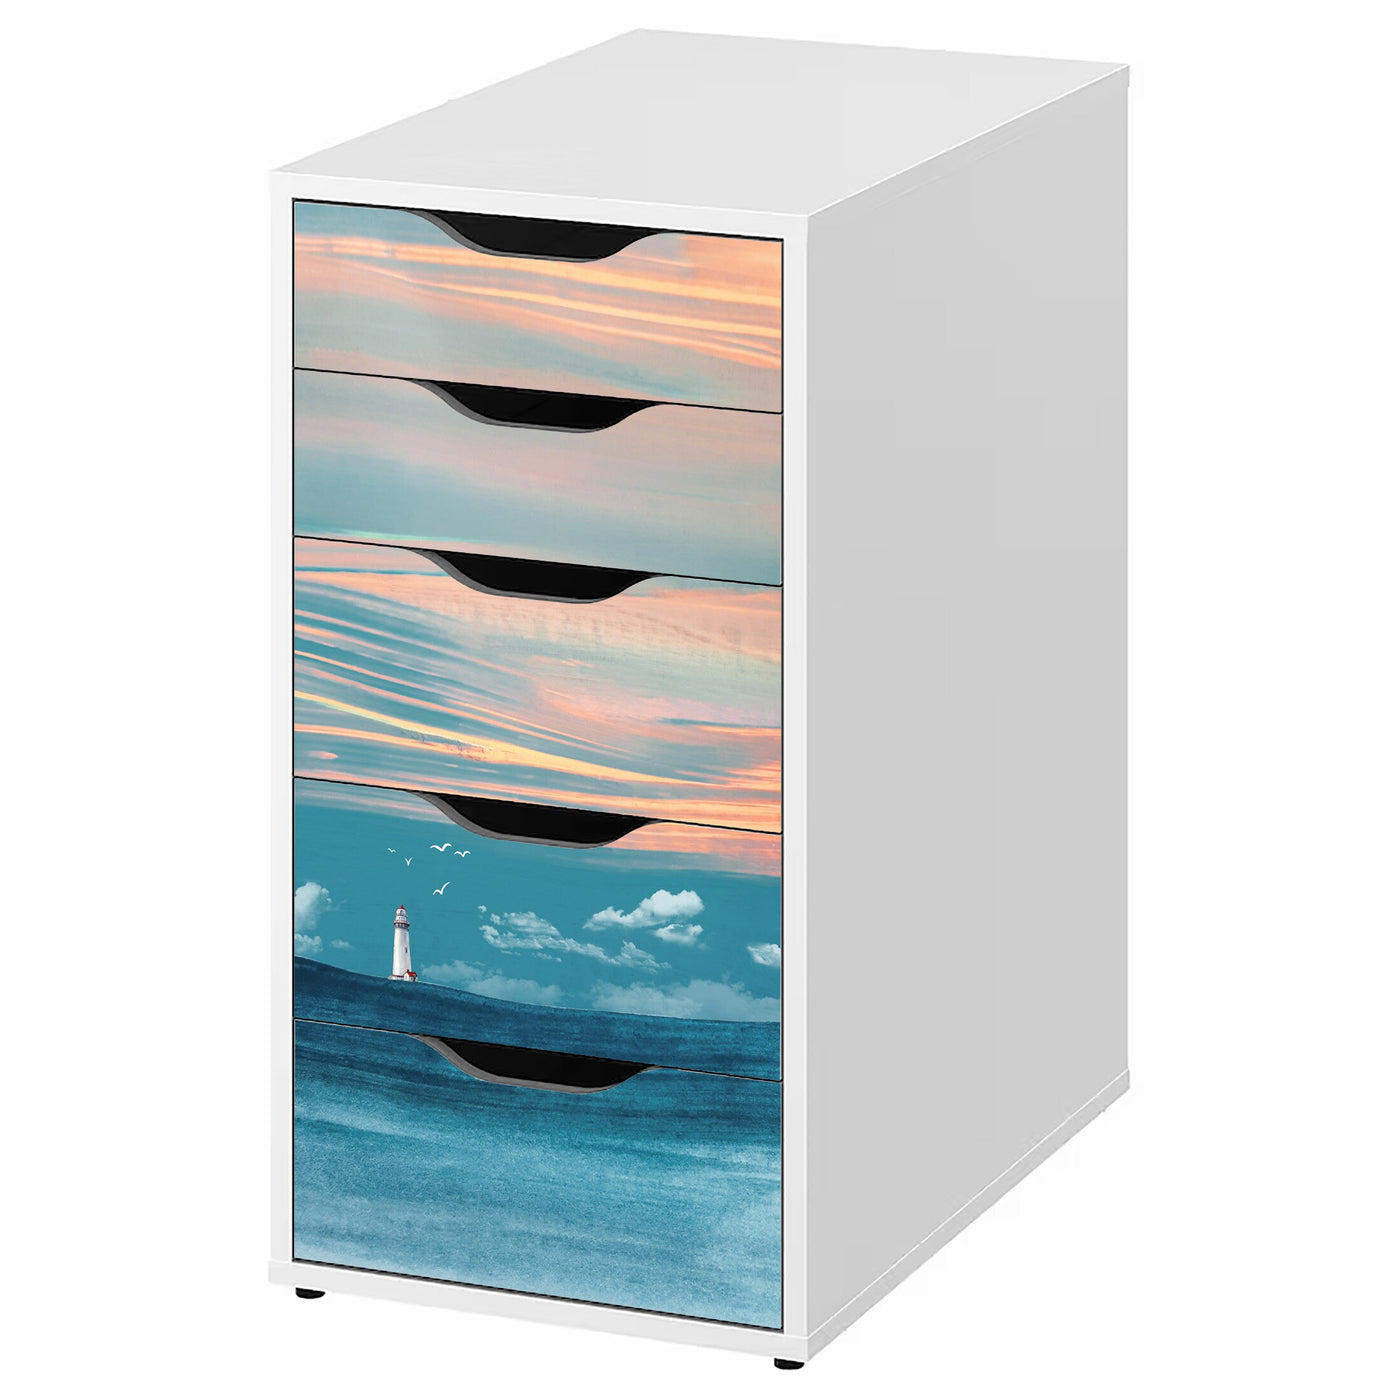 Lighthouse decals for IKEA Alex 5 drawer unit (not included)